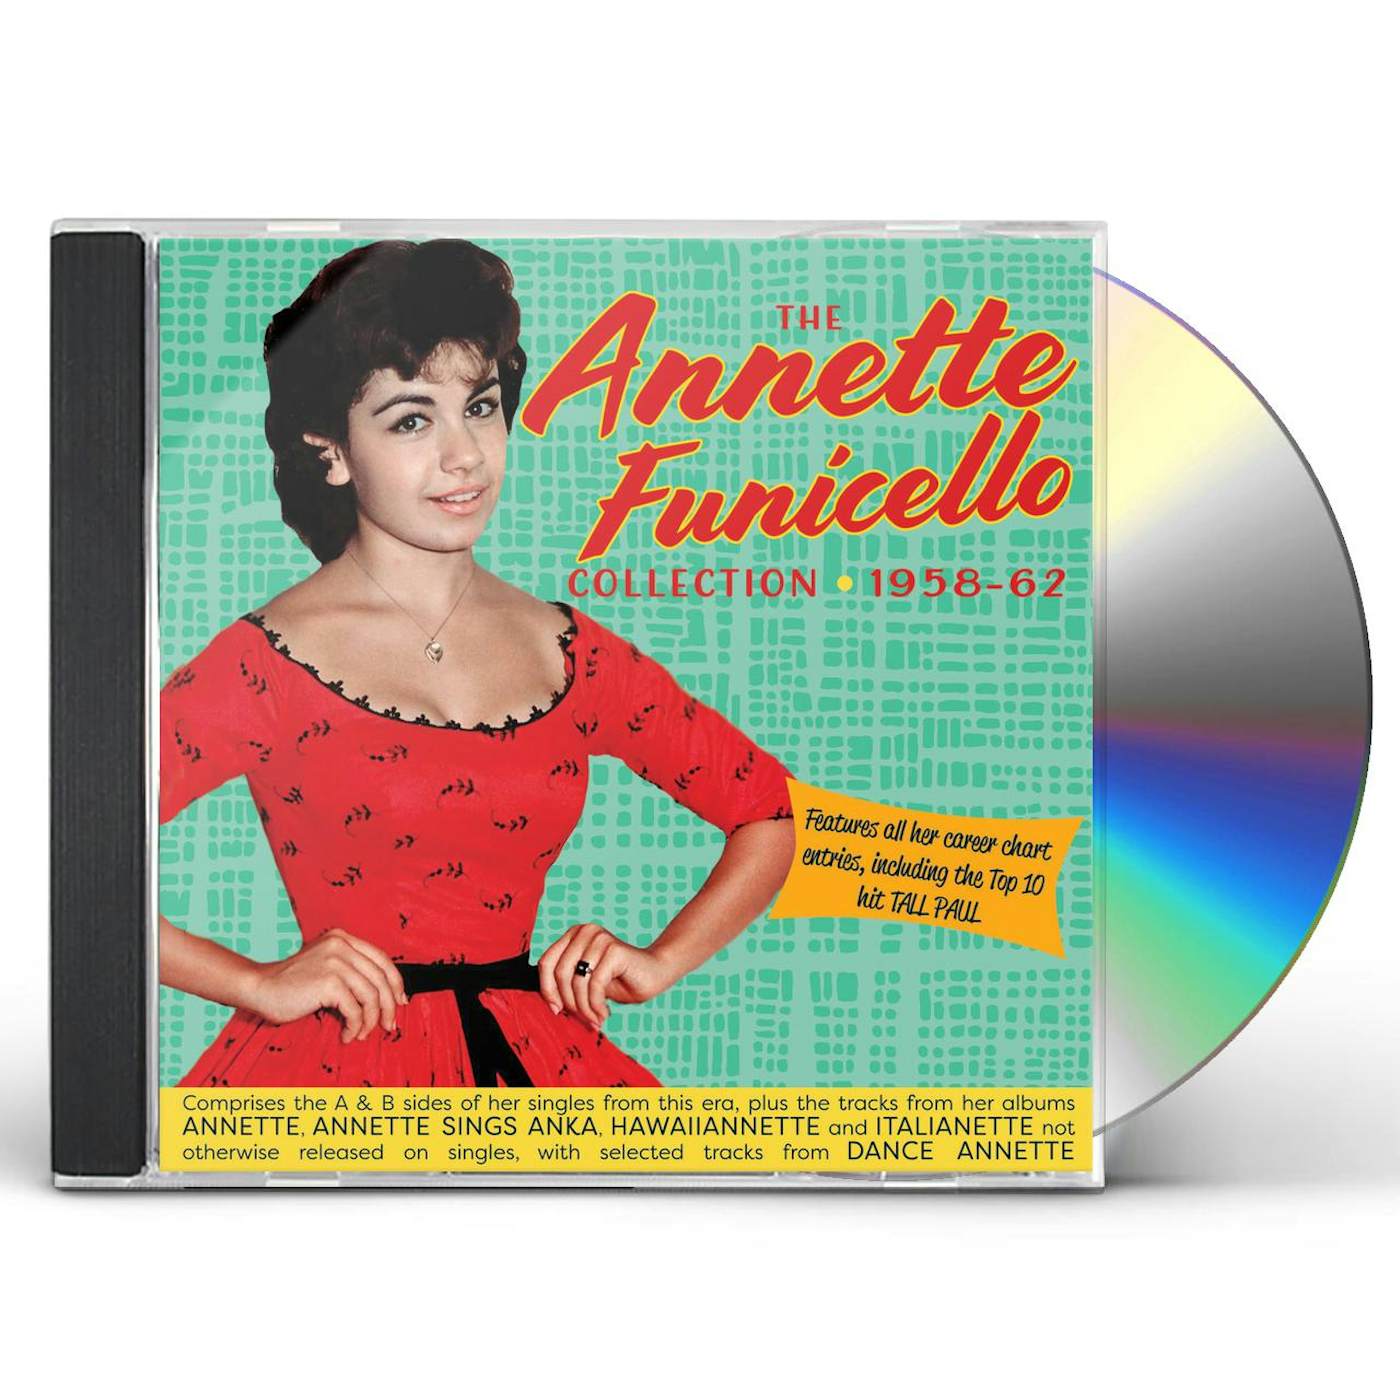 Annette Funicello SINGLES & ALBUMS COLLECTION 1958-62 CD